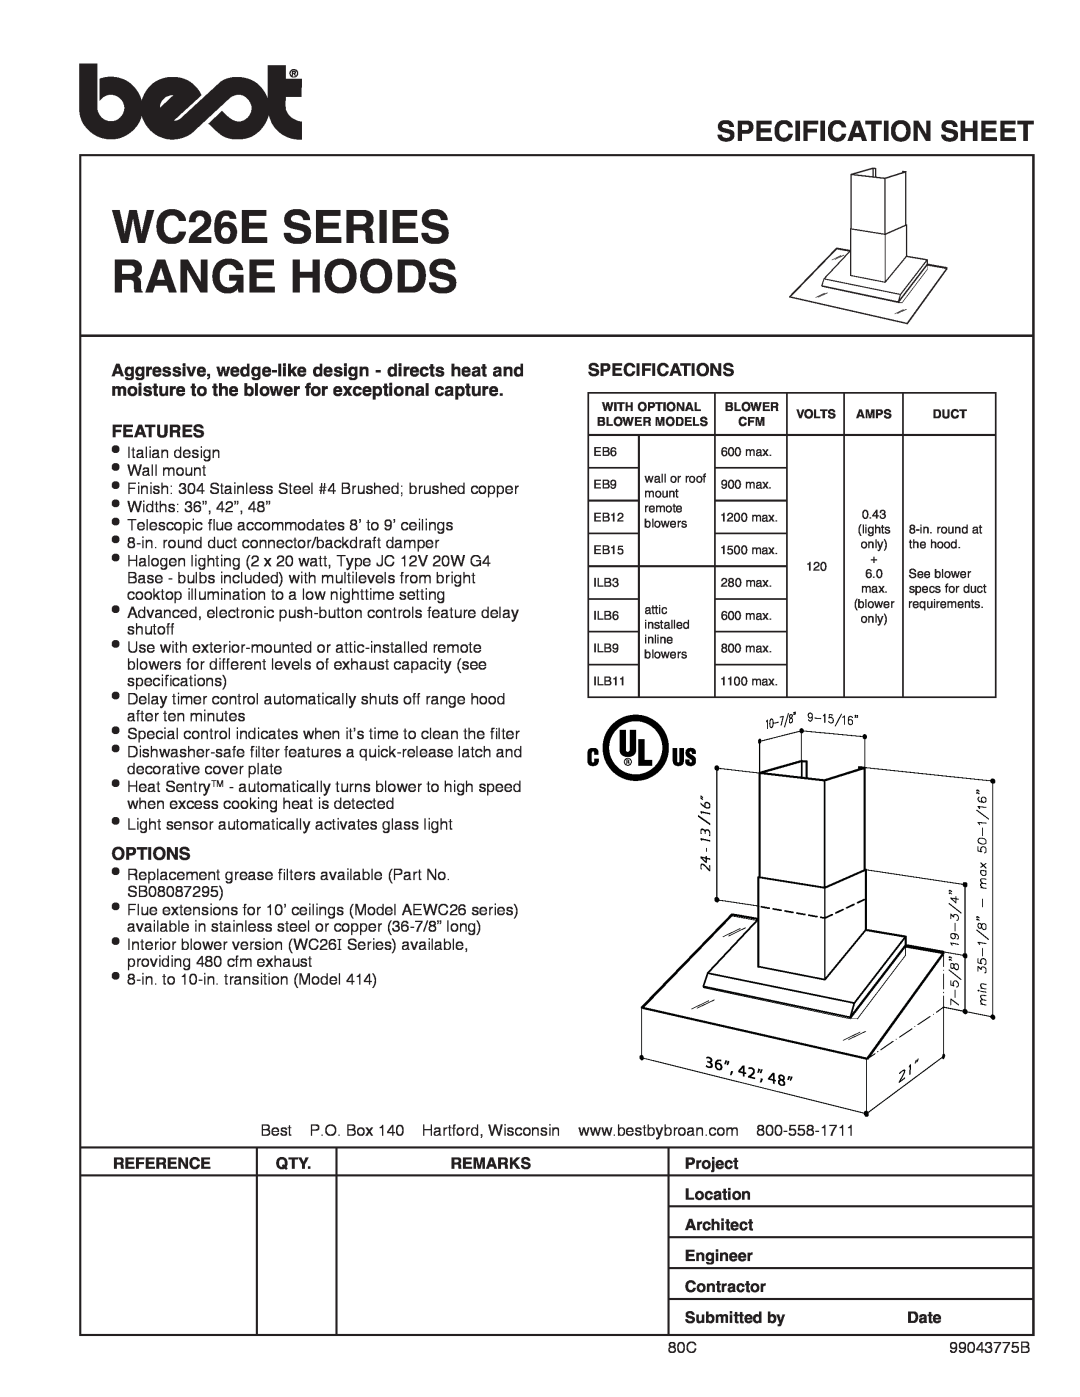 Best WC26E Series specifications WC26E SERIES RANGE HOODS, Specification Sheet, Features, Options, Specifications 